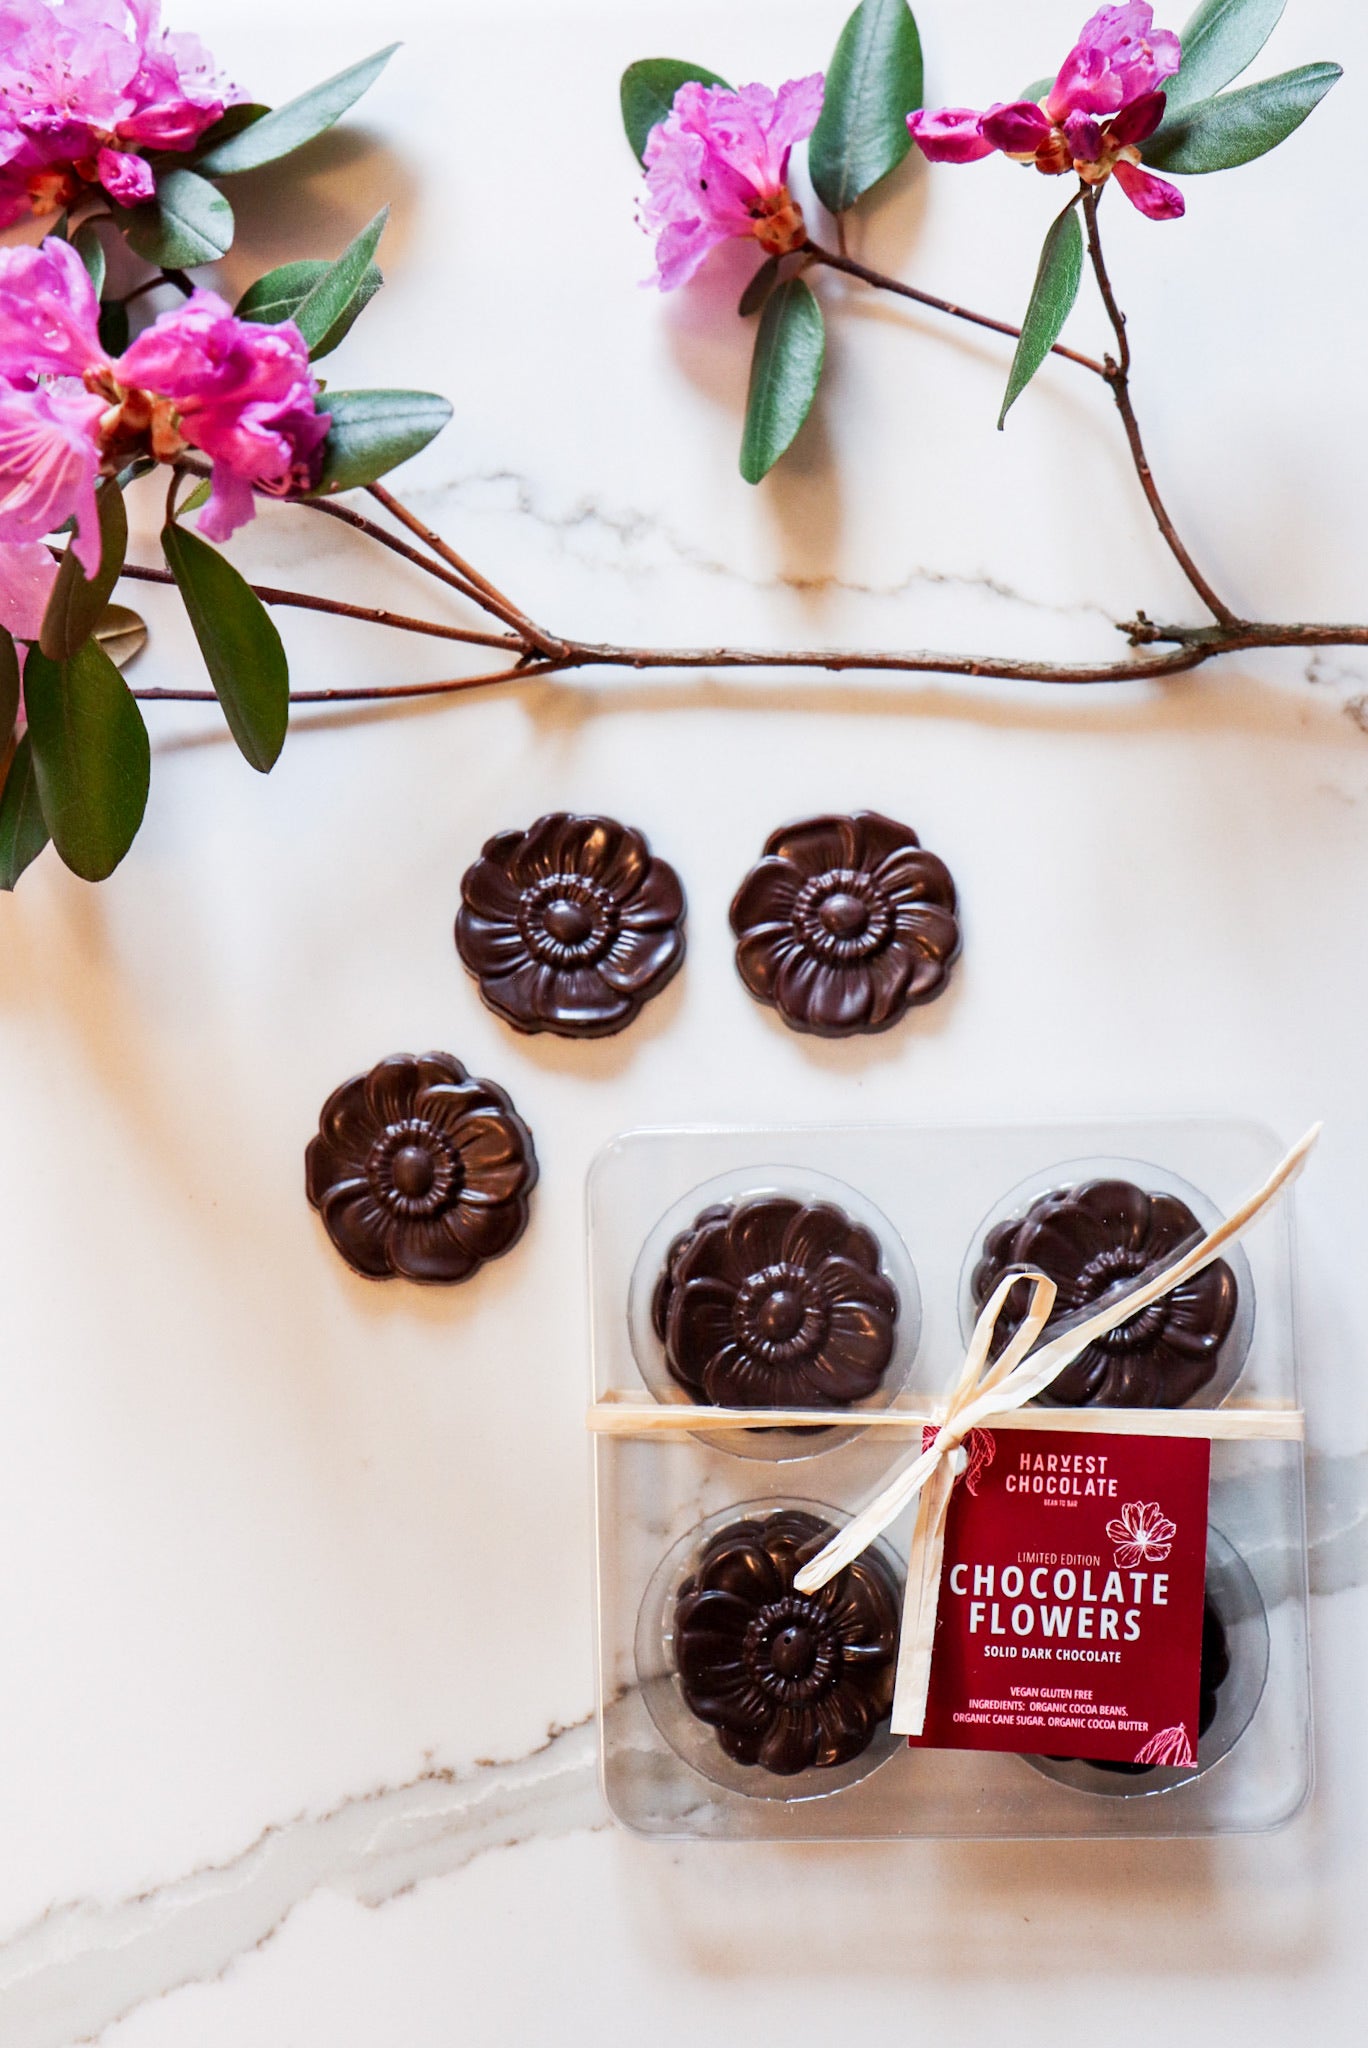 A photo of Harvest Chocolate Flowers made from Ecuadorian cocoa beans, placed next to fresh pink blooms on a marble surface. Below them, a packaged box of Harvest Chocolate Flowers tied with a string.